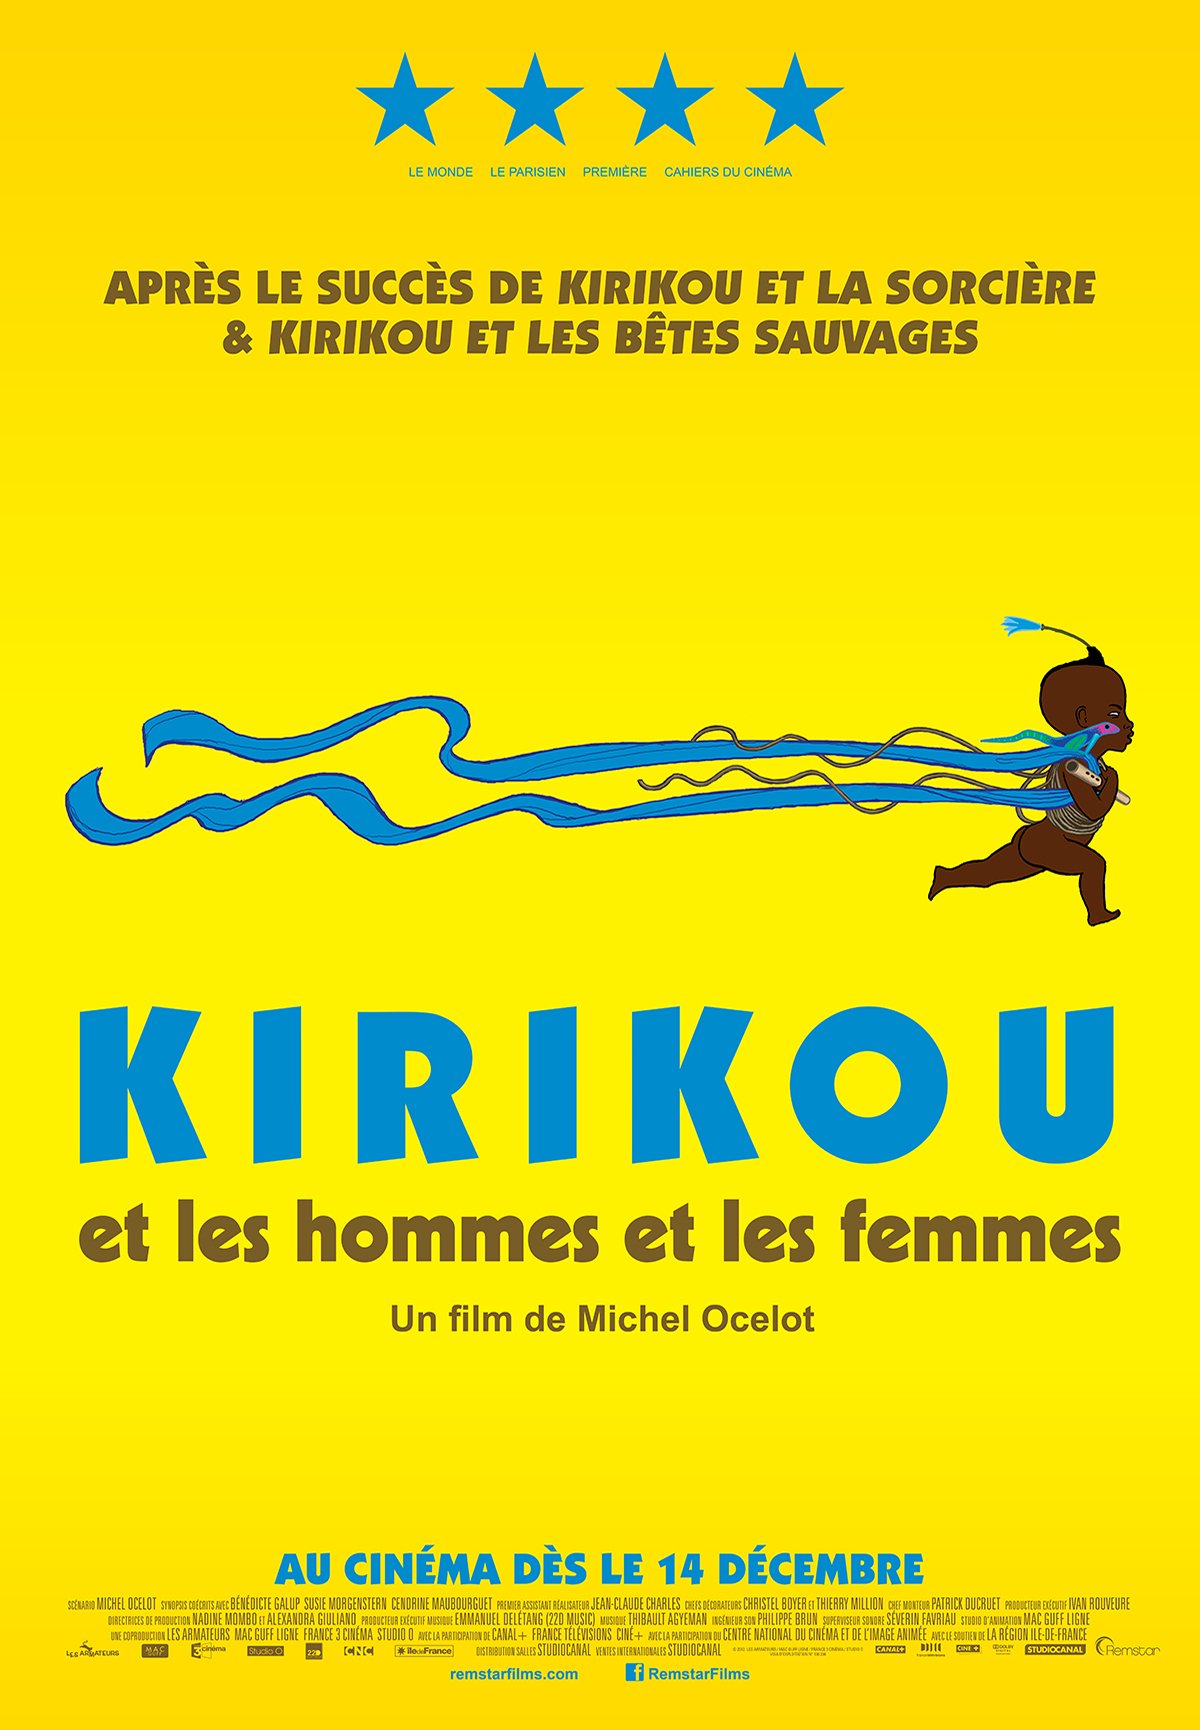 Poster of the movie Kirikou and the Men and Women